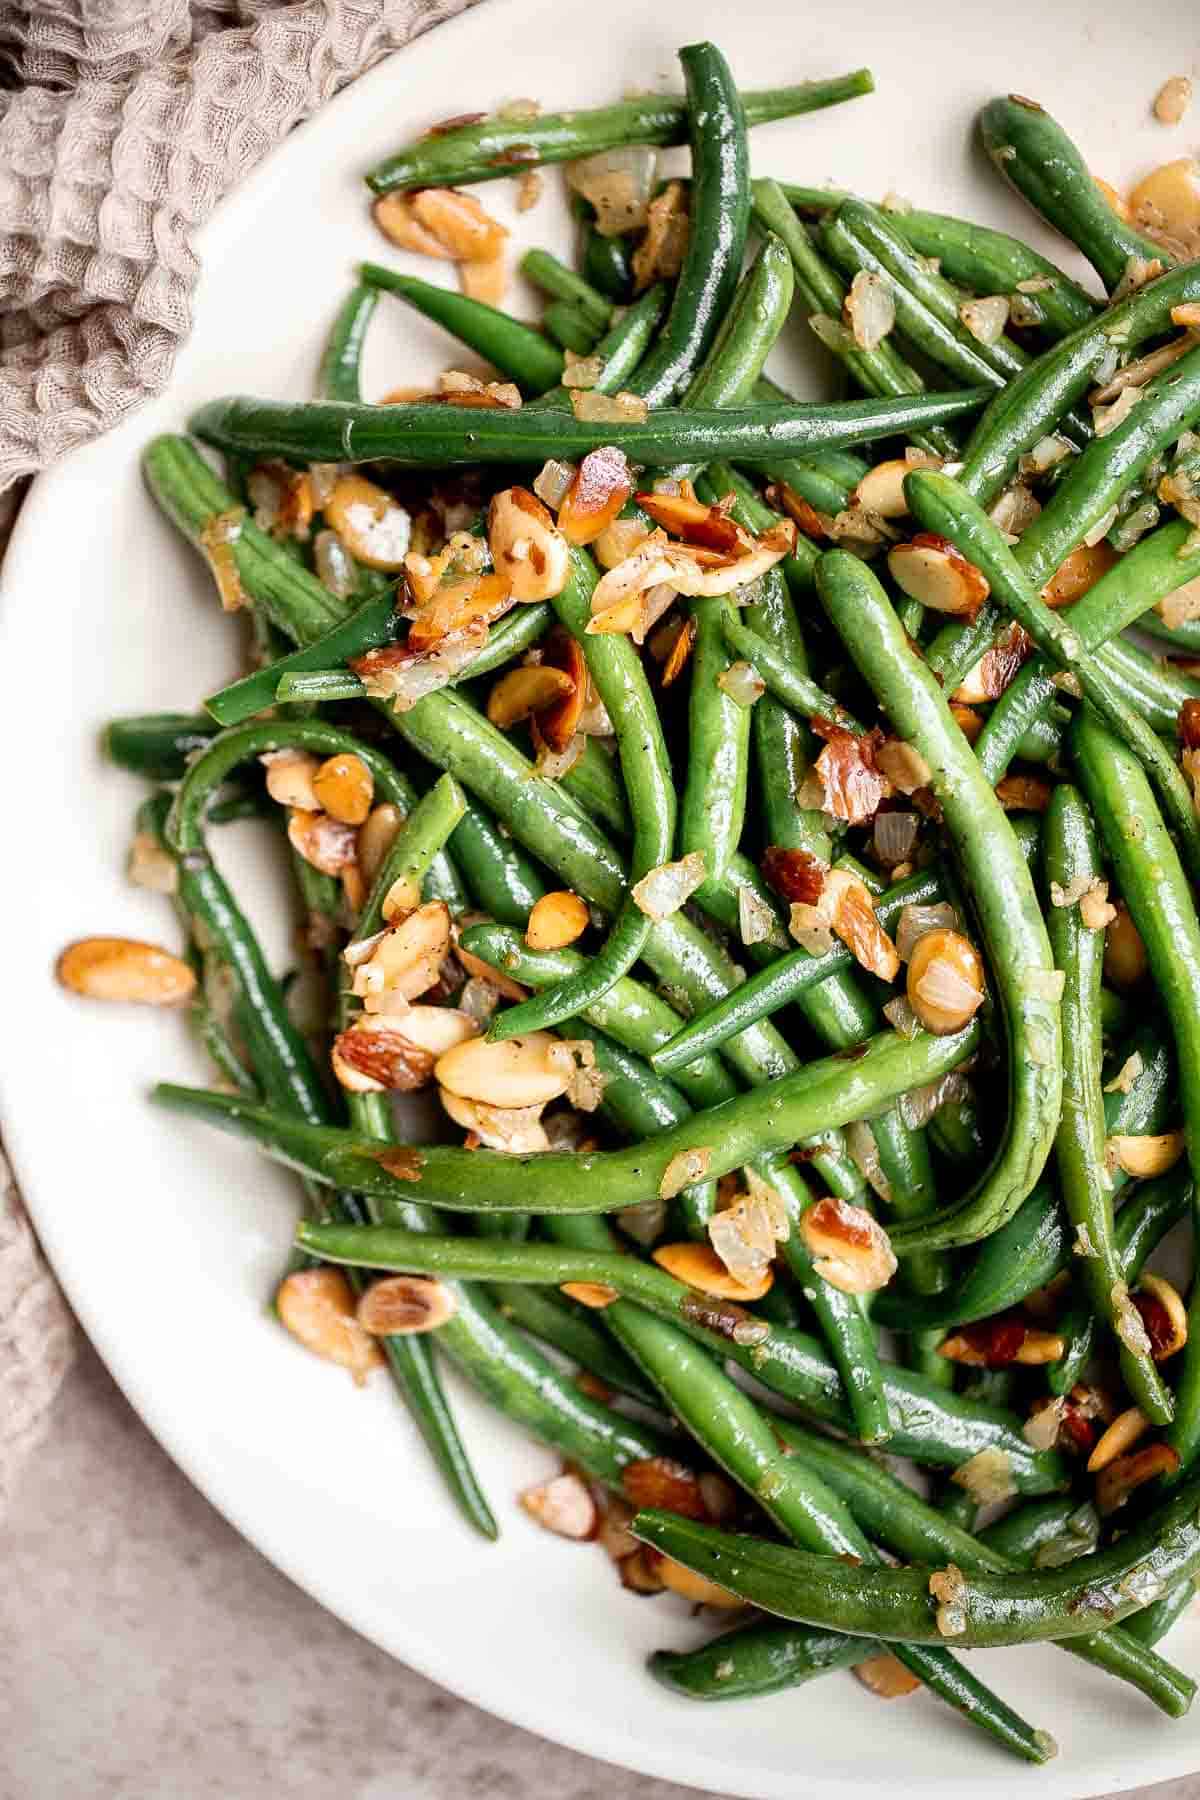 Green Beans Almondine is buttery, garlicky, and nutty. This classic French side dish is quick and easy to make, and loaded with flavor and texture. | aheadofthyme.com